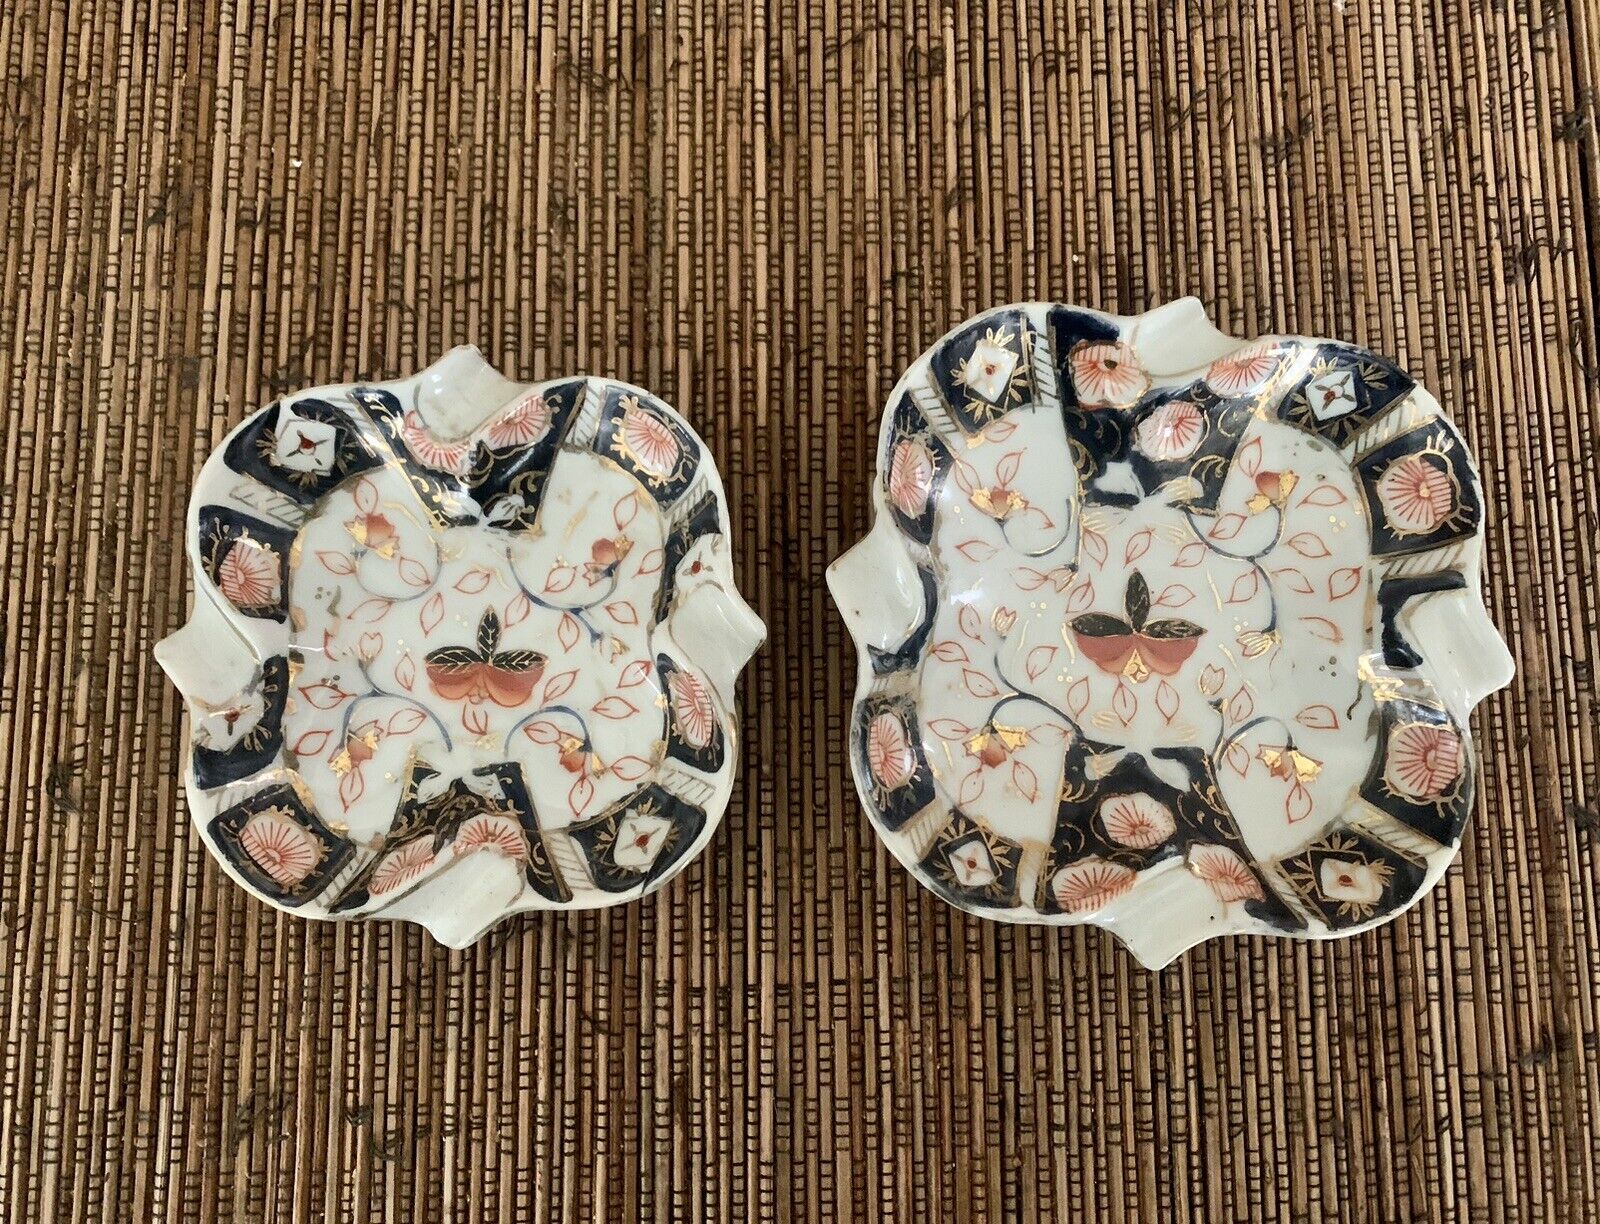 Nice set of 2 Rare HTF Vintage Handpainted Collectible Ashtrays